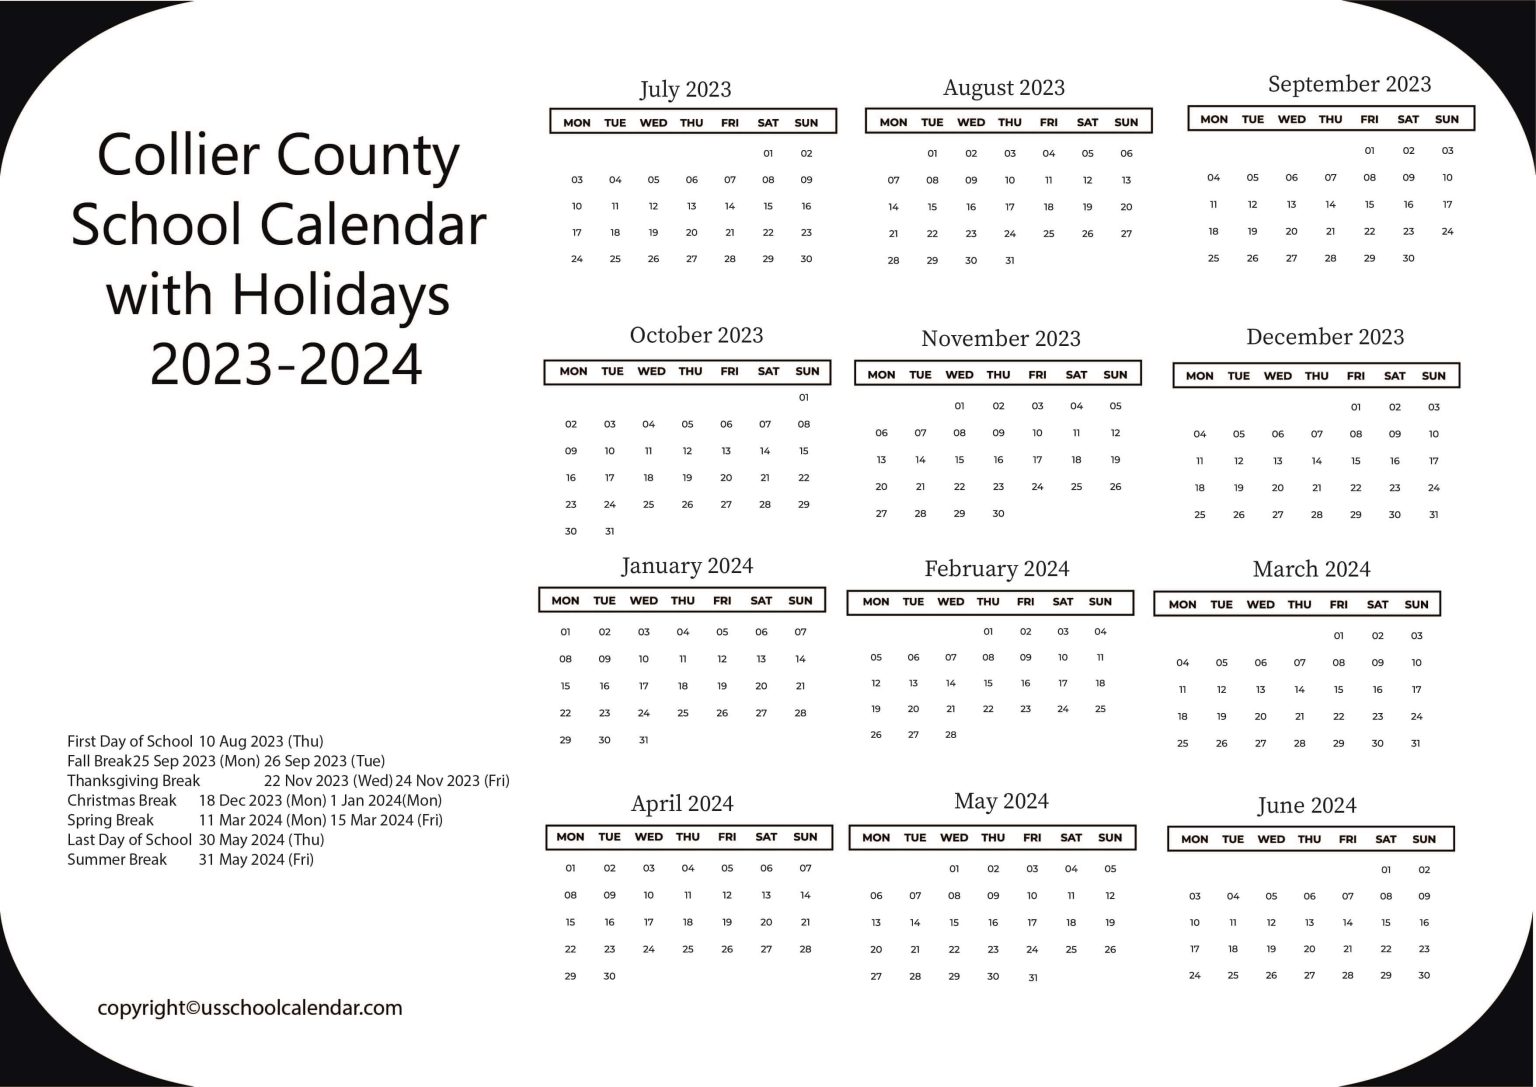 Collier County School Calendar with Holidays 20232024